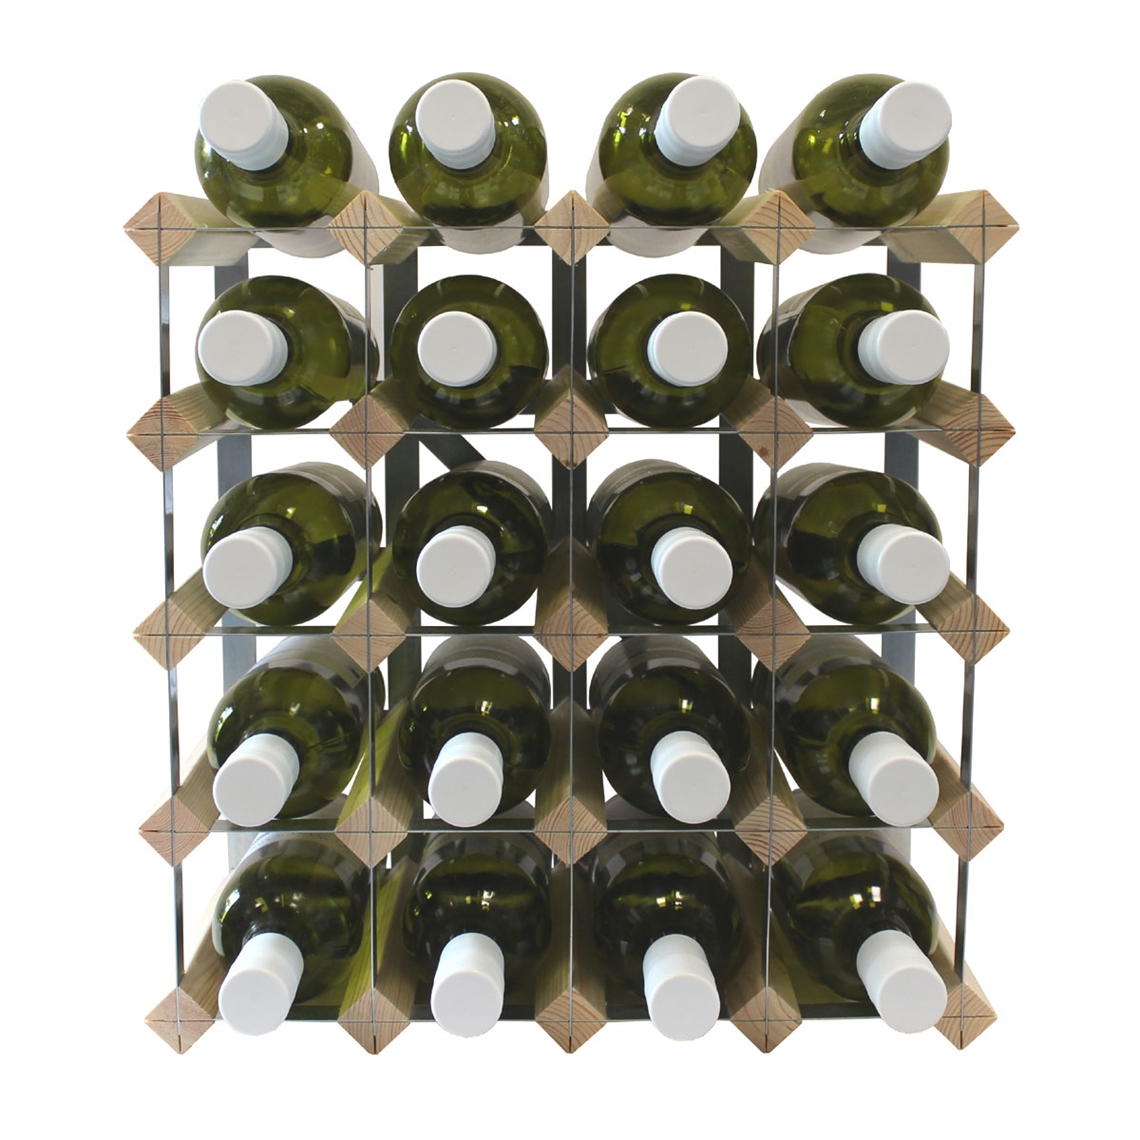 View more bespoke traditional wine rack calculator from our Assembled Wine Racks range